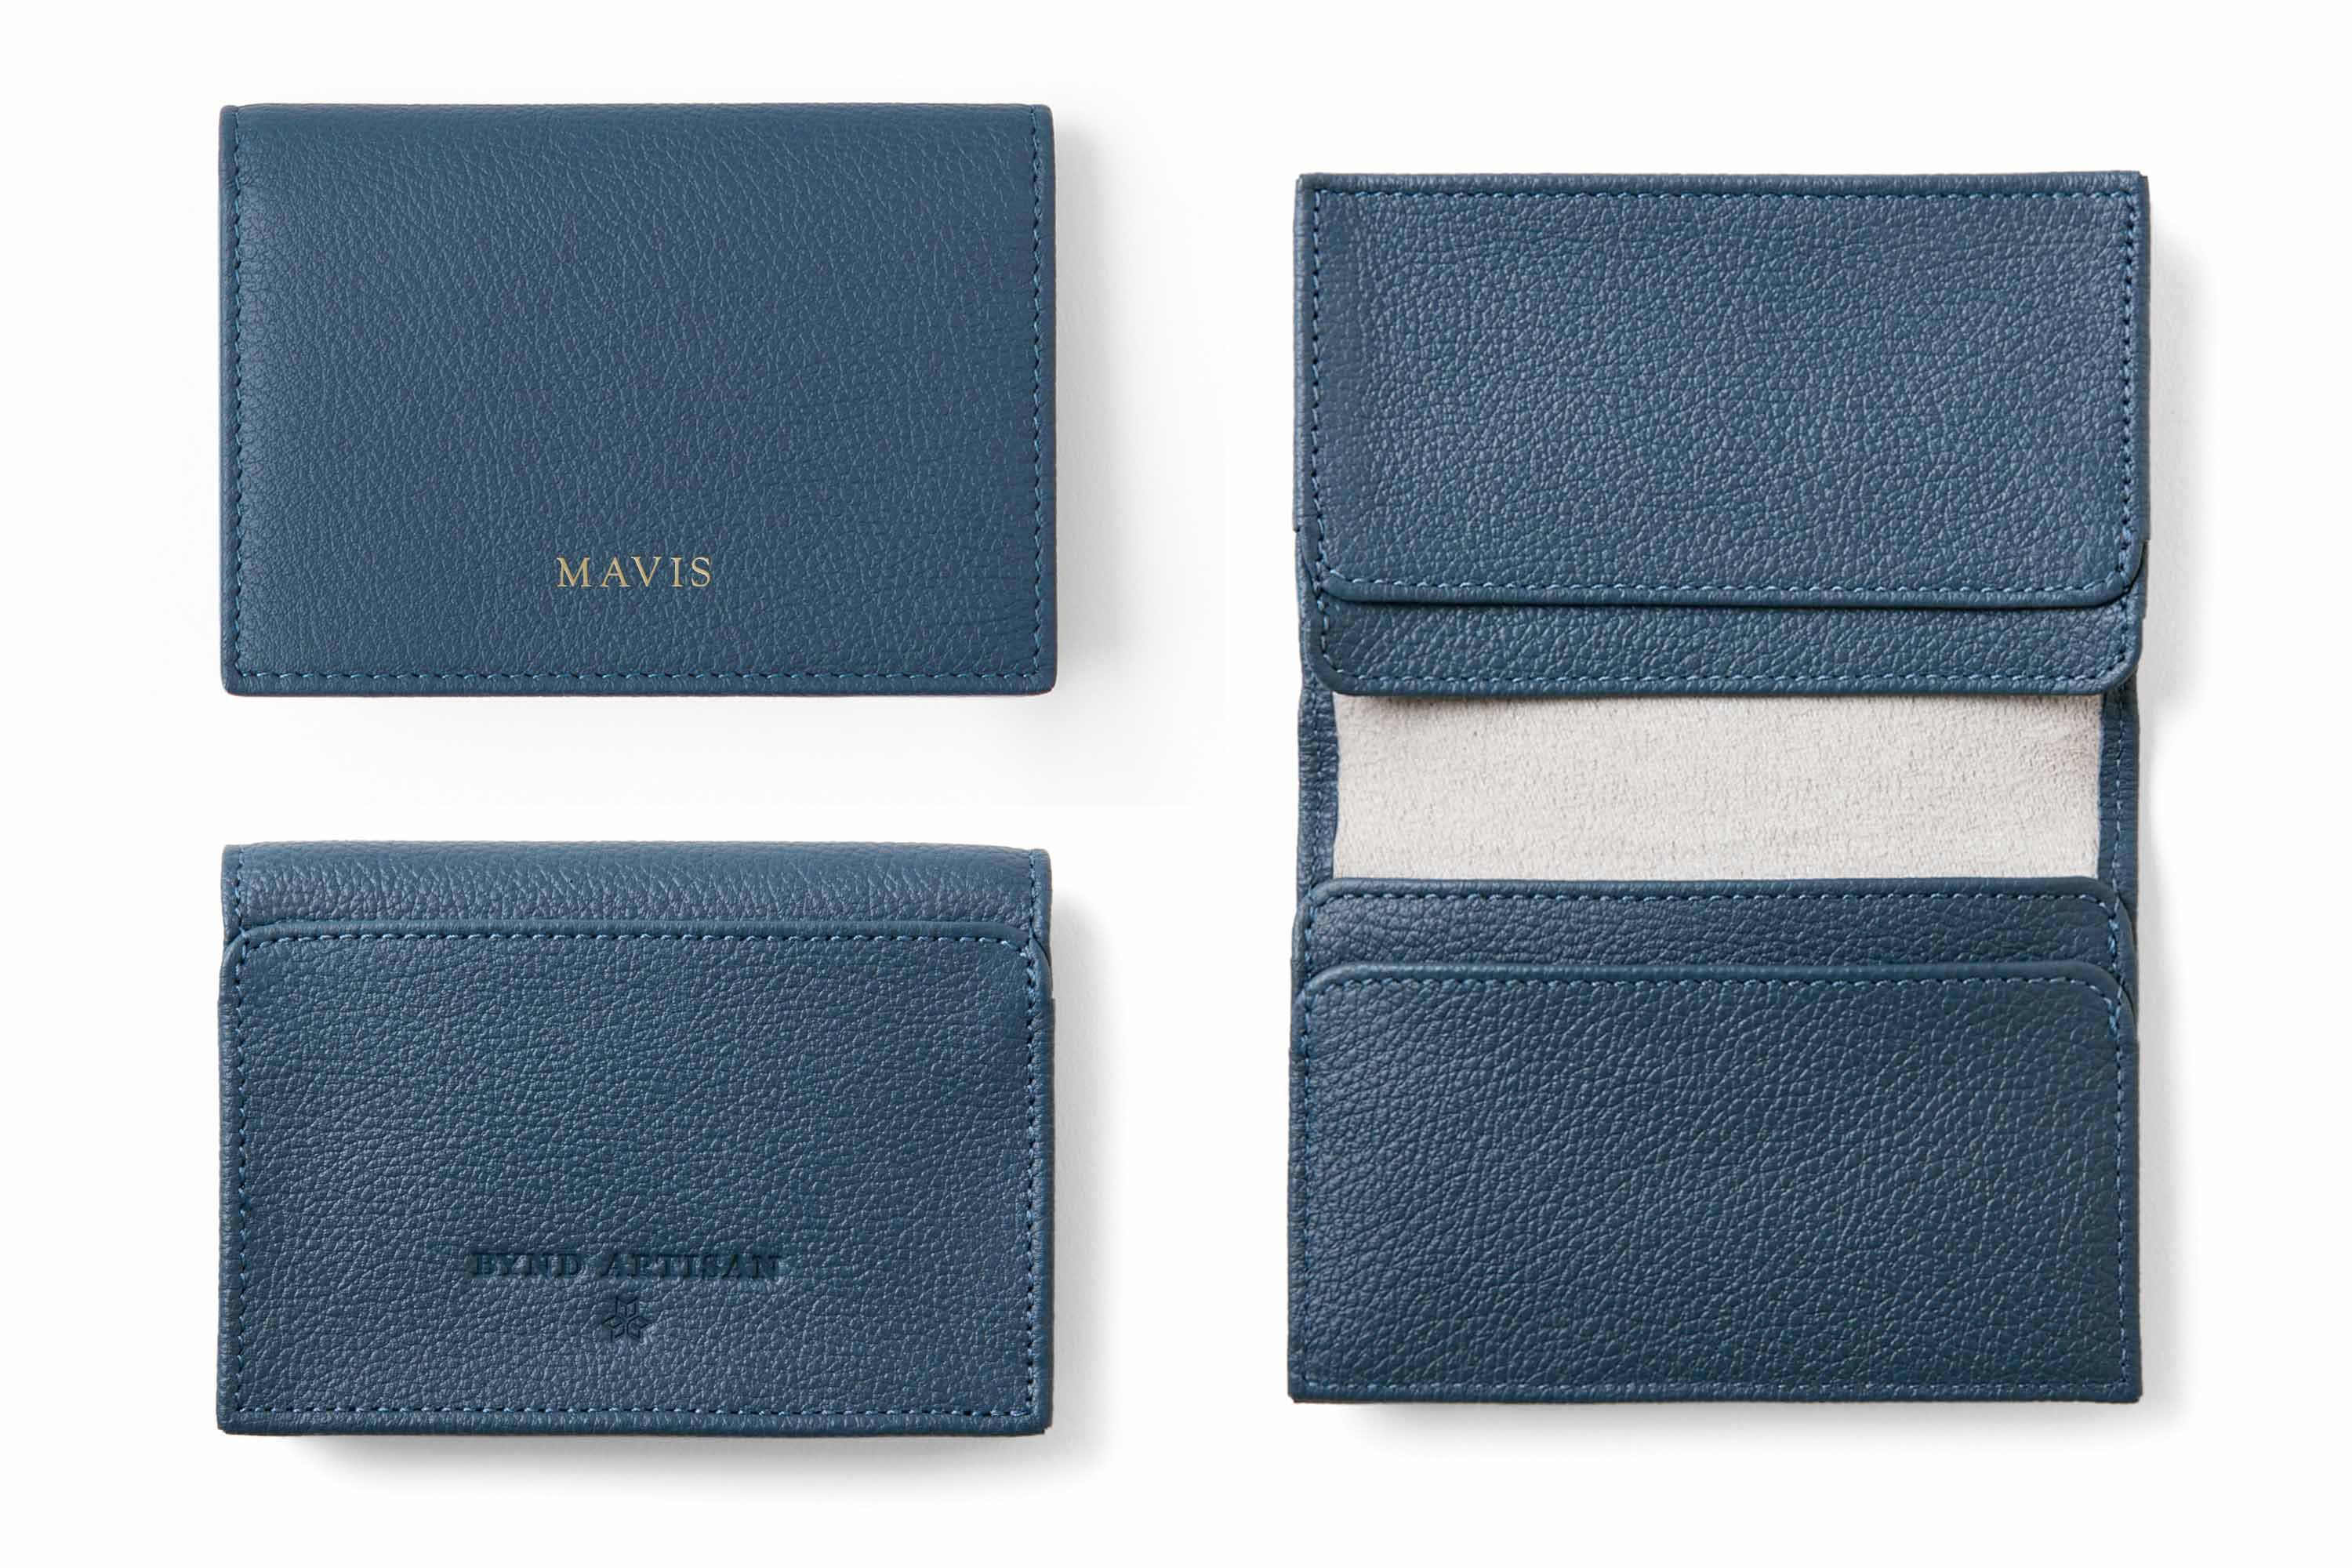 Leather name cards and credit card multi-card holder from Bynd Artisan | The Edit by KrisShop